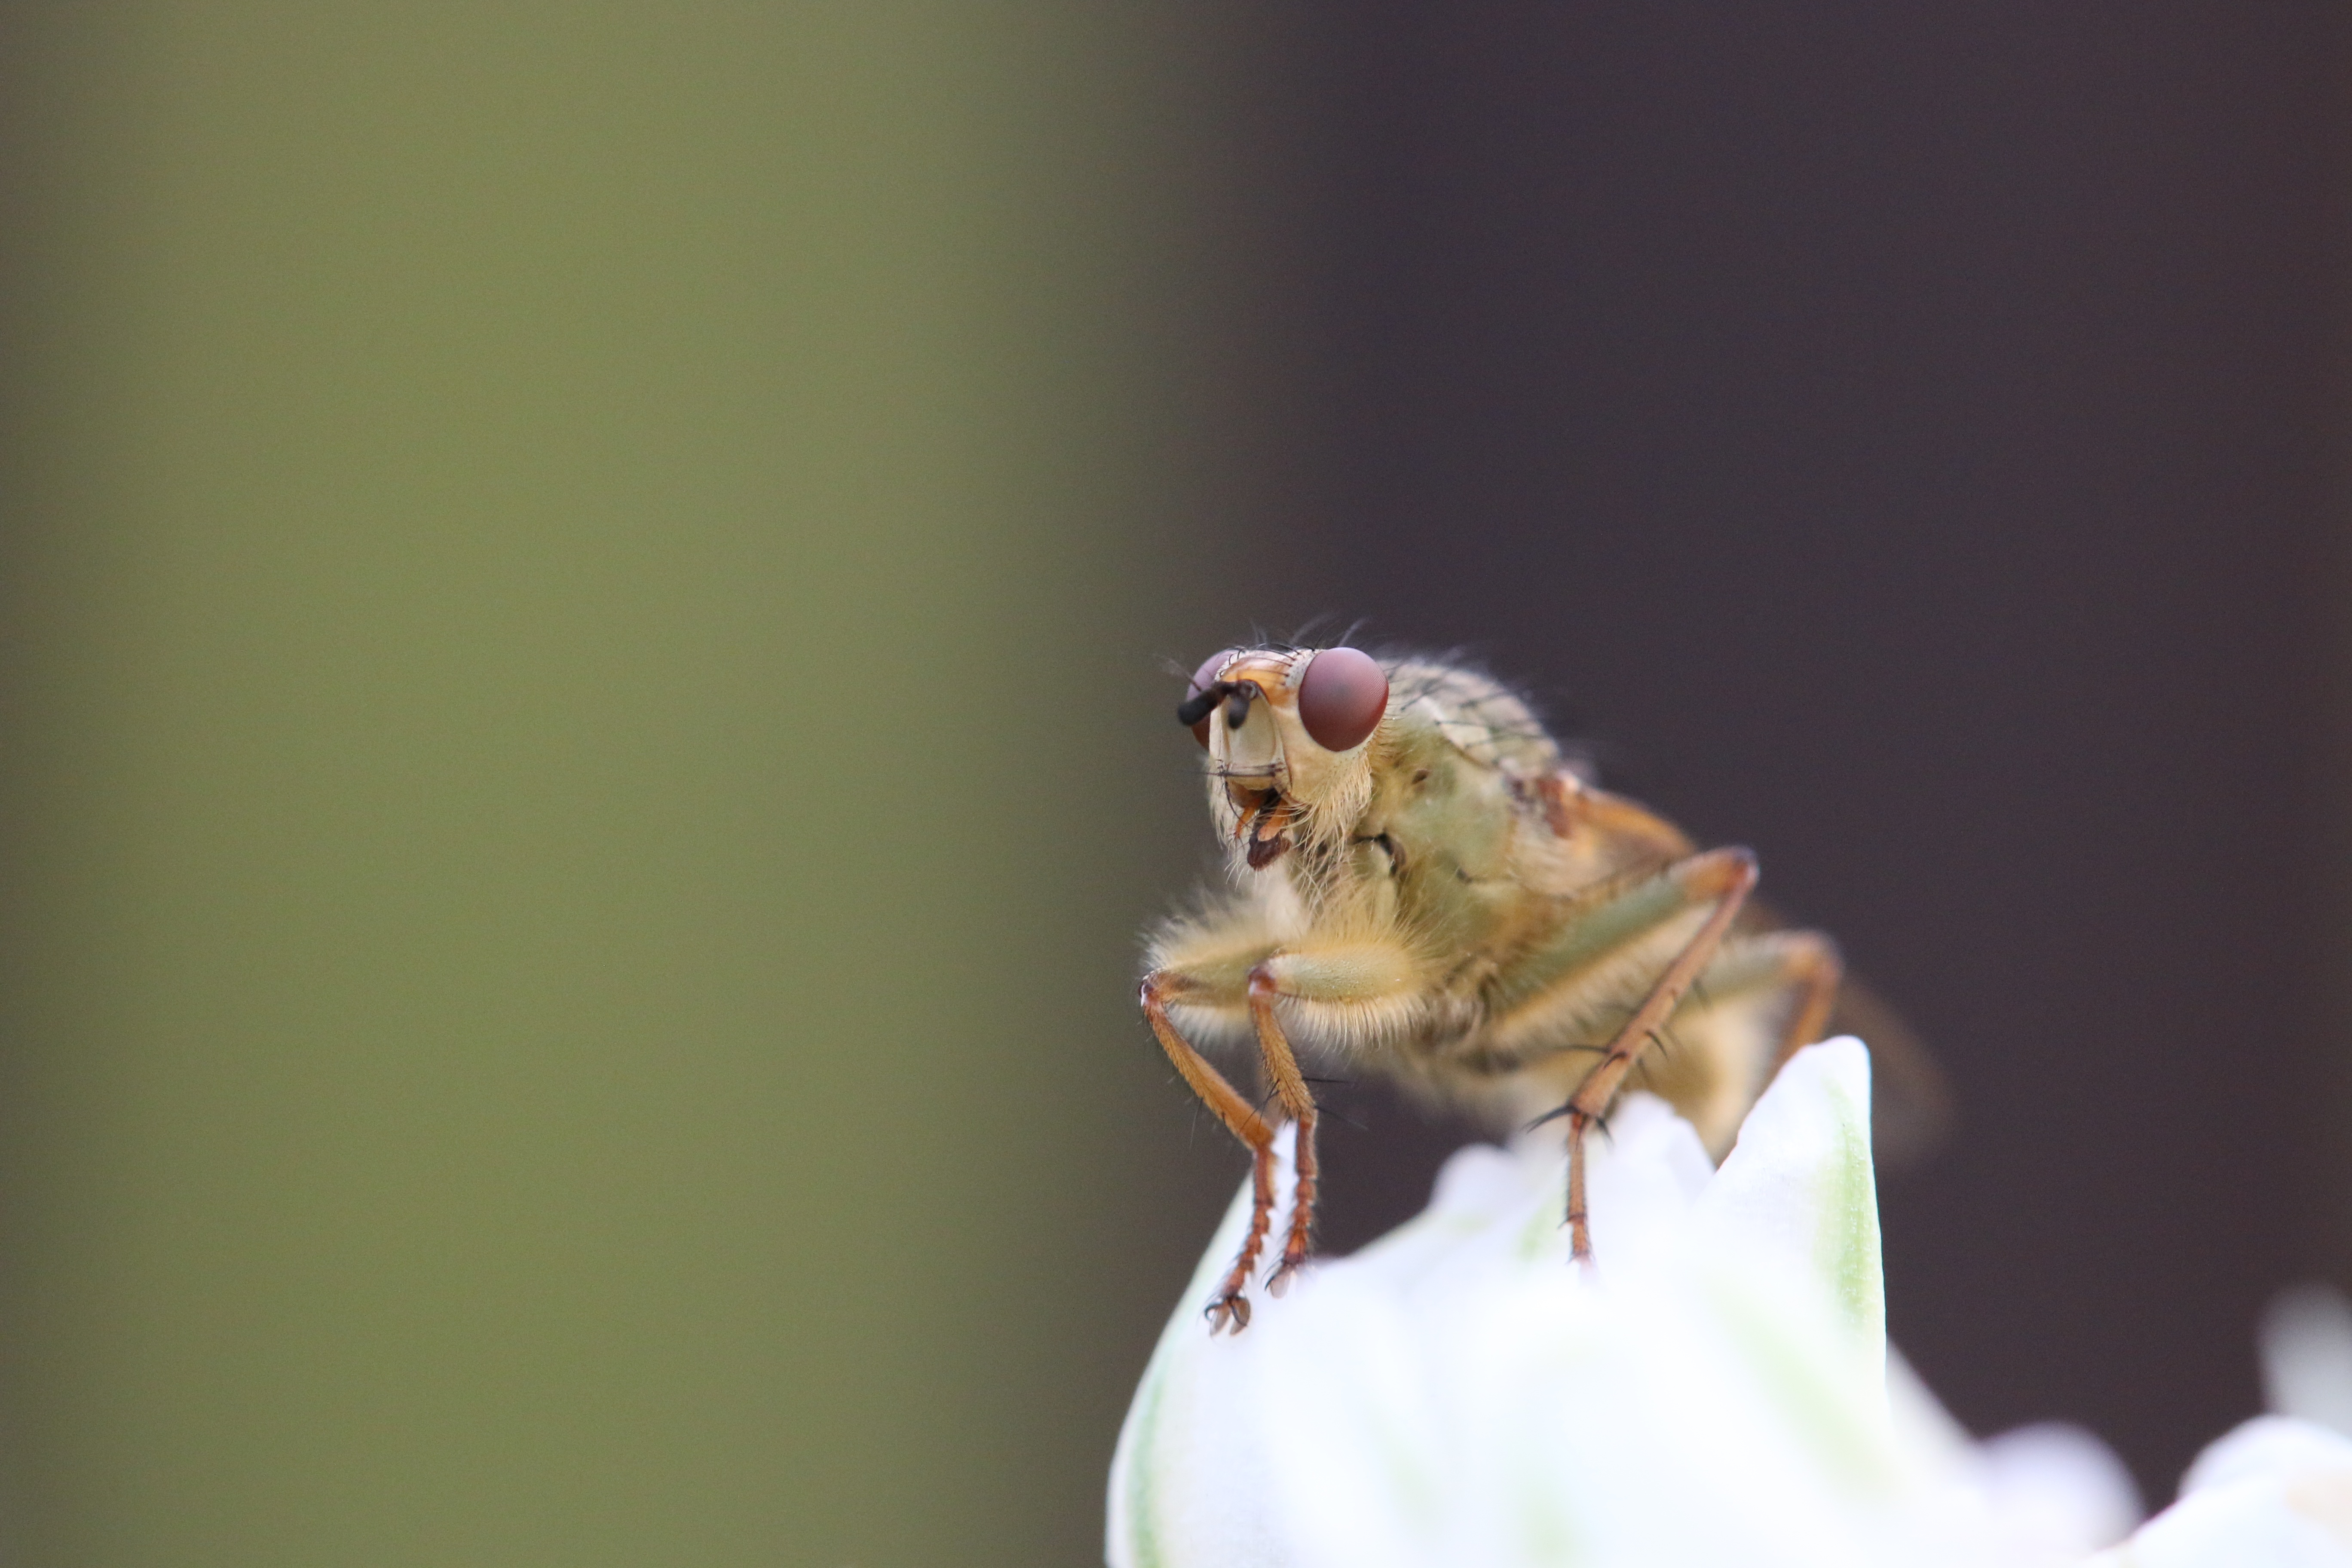 Fly Insect Macro 5472x3648